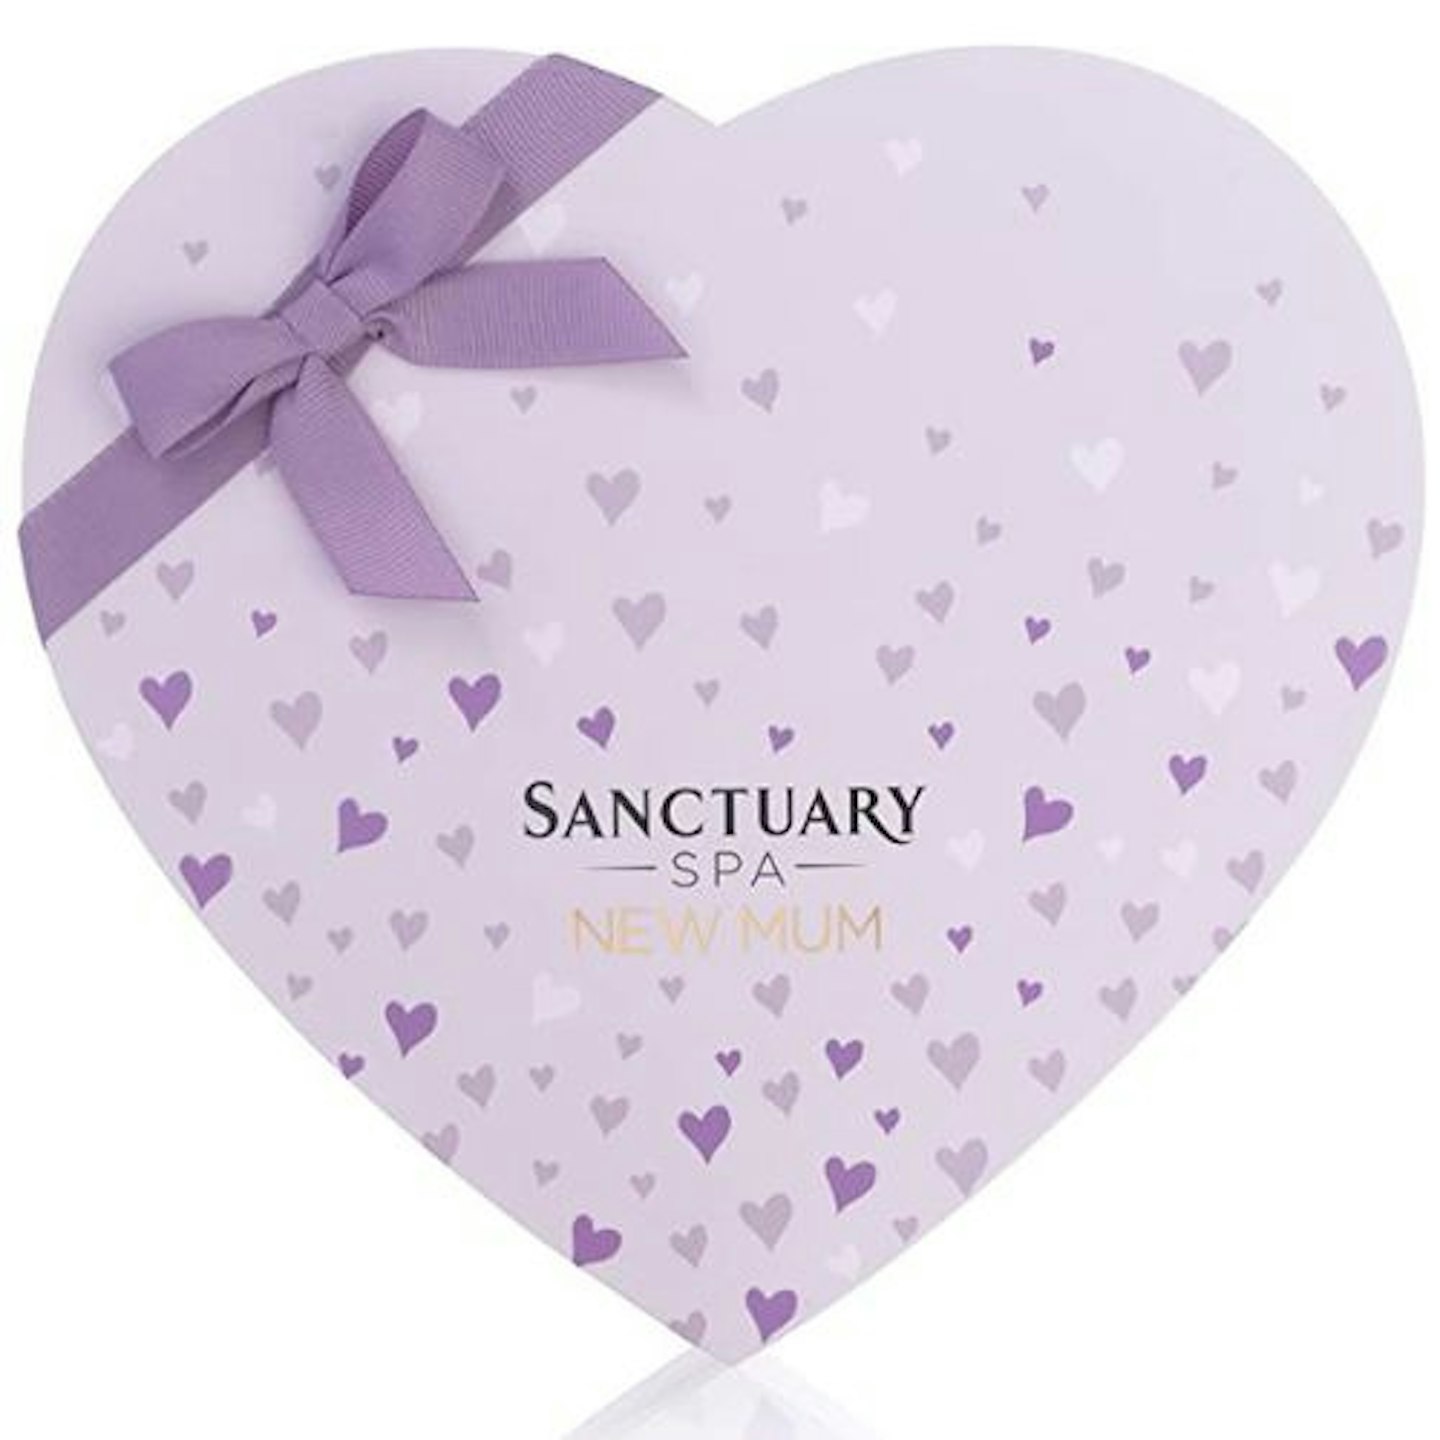 Sanctuary Spa Baby Shower Gift Set - Baby shower gift